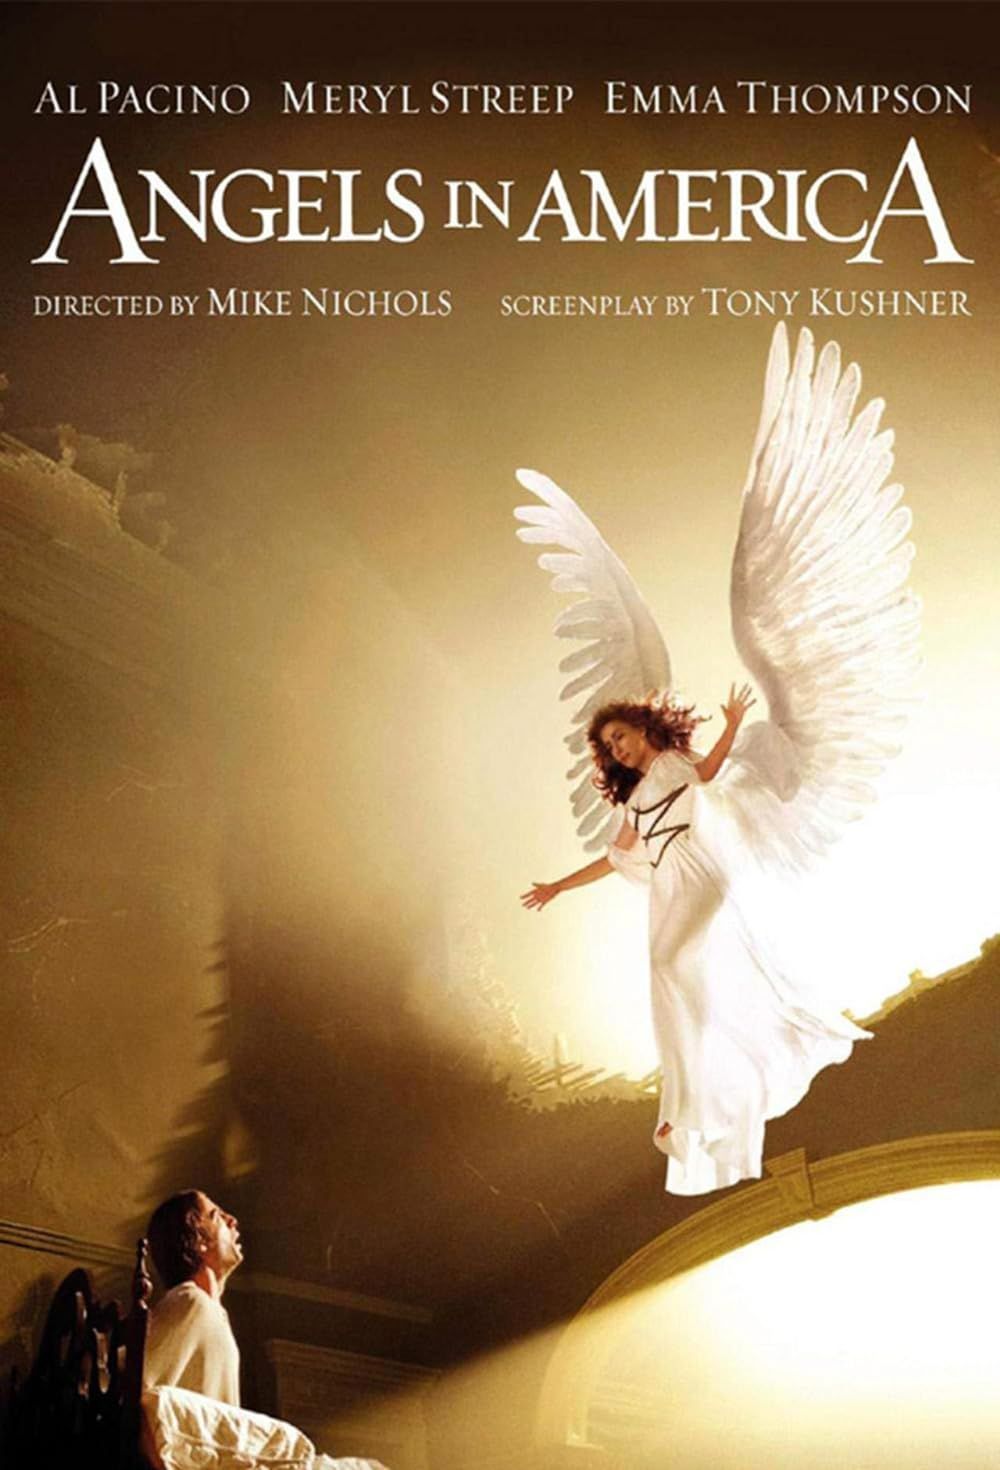 angels-in-america-hbo-poster